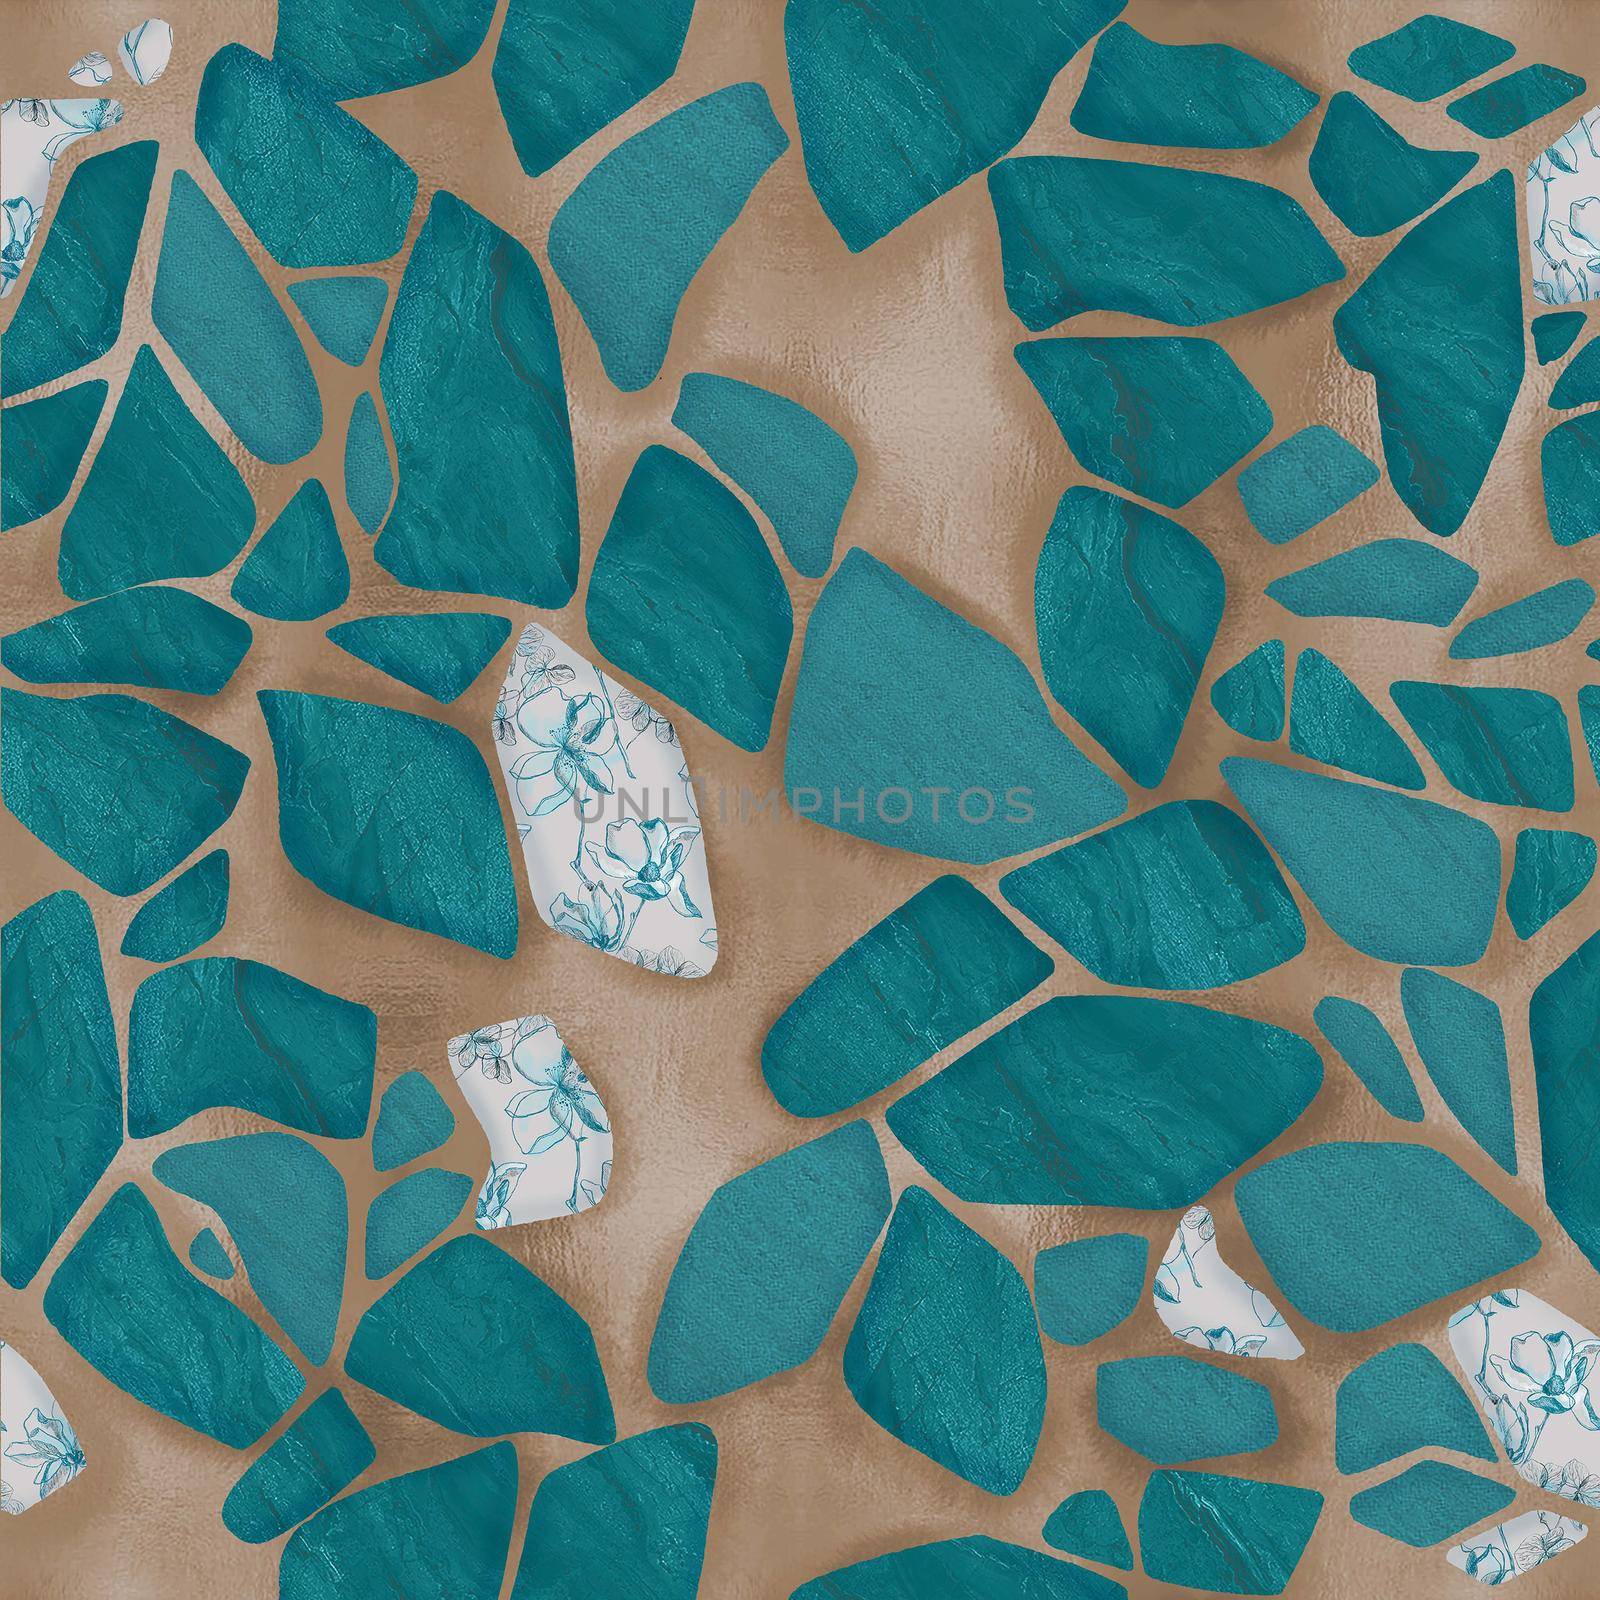 Geometric seamless pattern with cracked ceramic tile texture. Kintsugi style background. Japanese technique with broken pieces glued with gold. Mosaic ornament overlay on flower silhouettes.